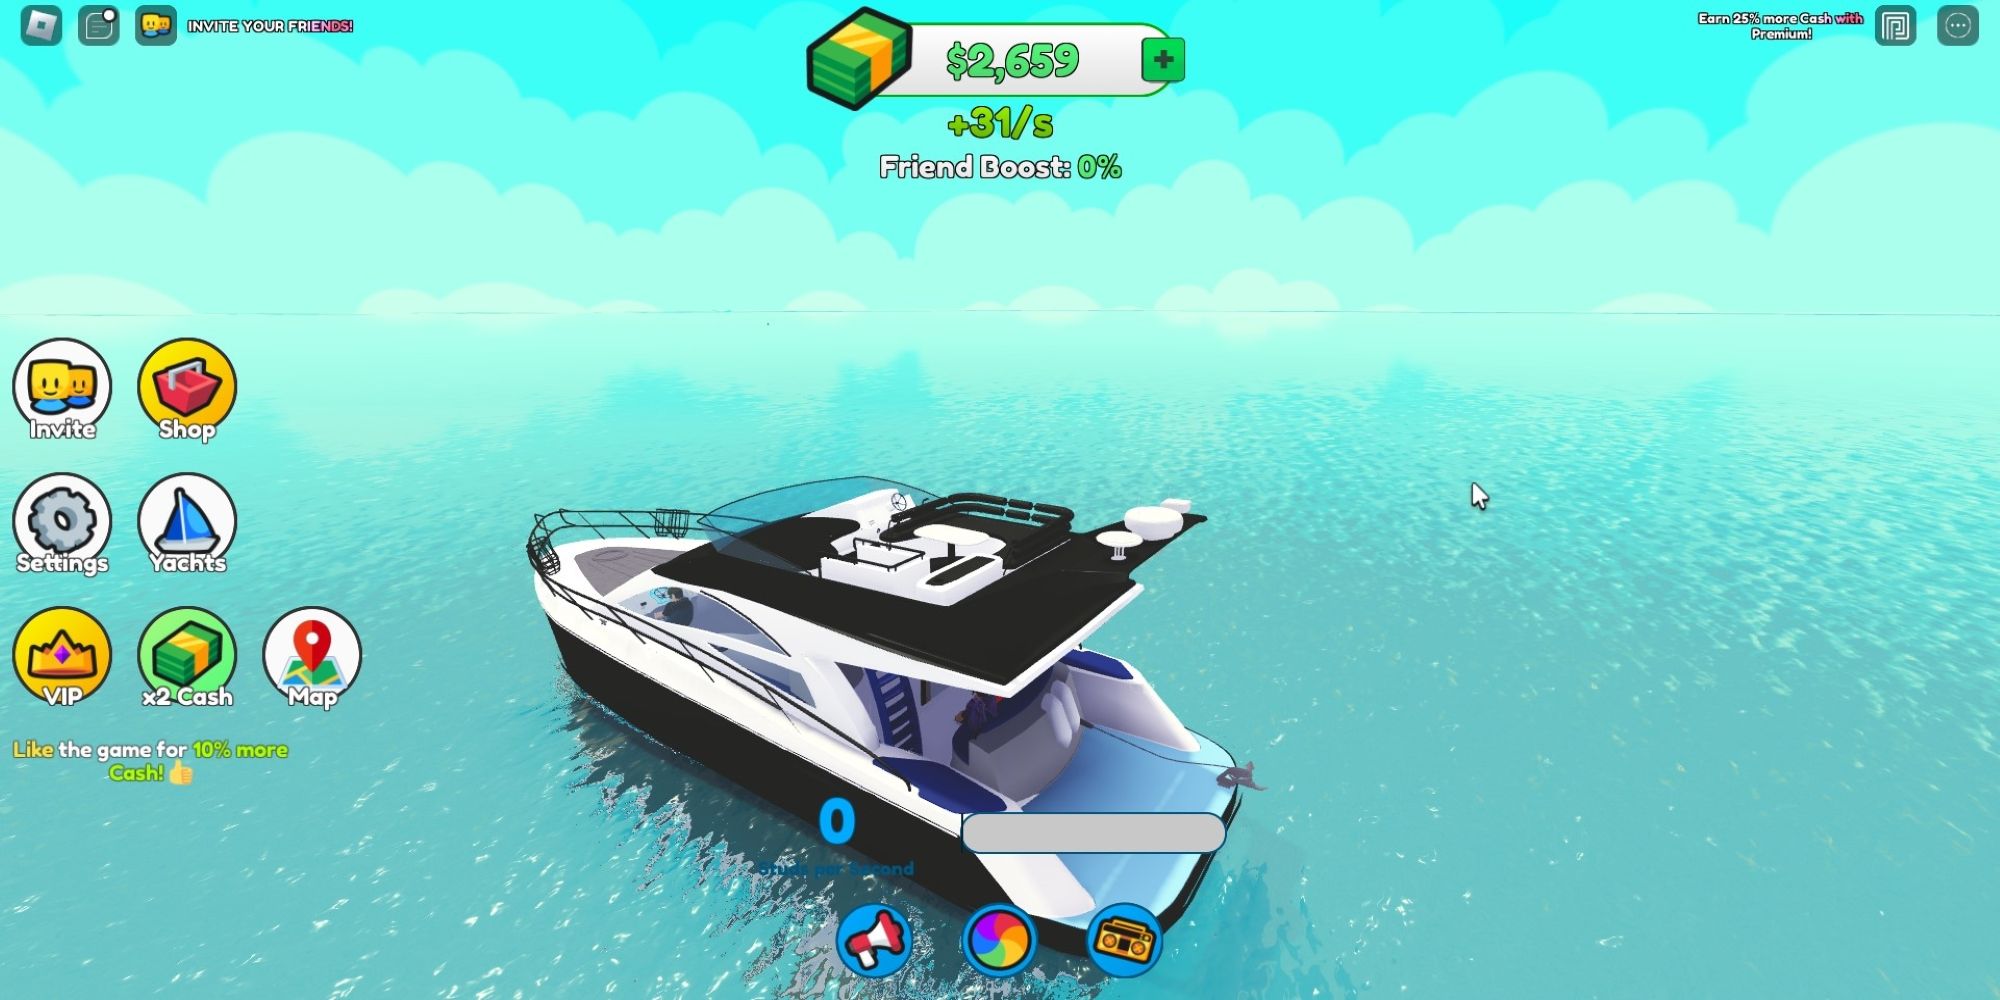 A Starter Yacht sails the sea to Treasure Island in the Roblox game, Mega Yacht Tycoon.